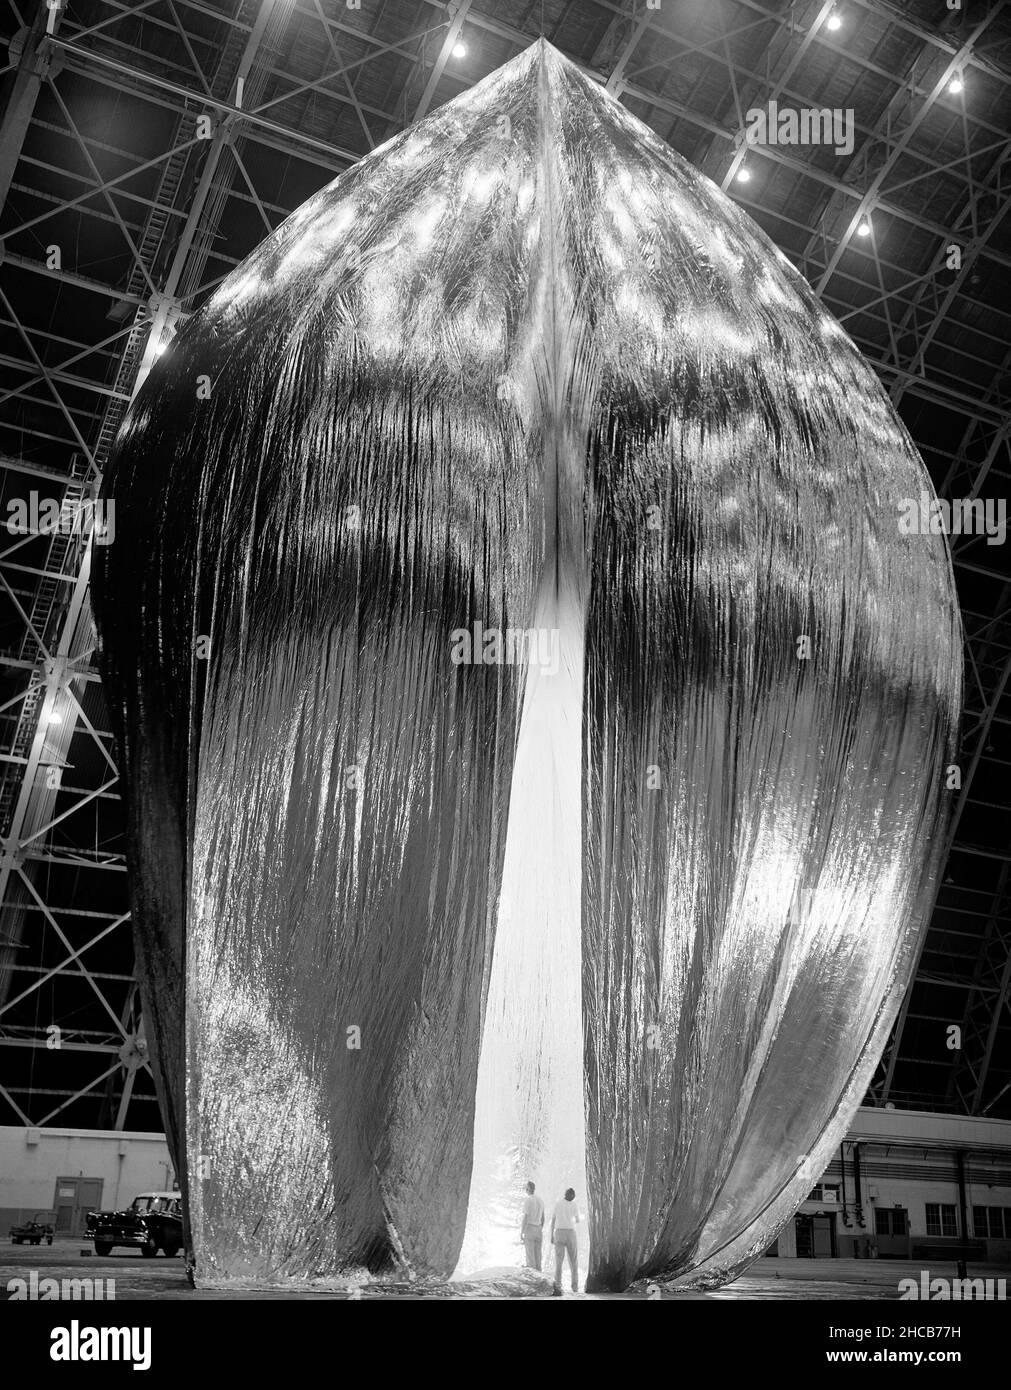 Inflation Tests of the Echo 1 Satellite in Weeksville, N.C.  1958-L-03603 Image Langley engineers Edwin Kilgore (center), Norman Crabill (right) and an unidentified man take a peek inside the vast balloon during inflation tests. Stock Photo